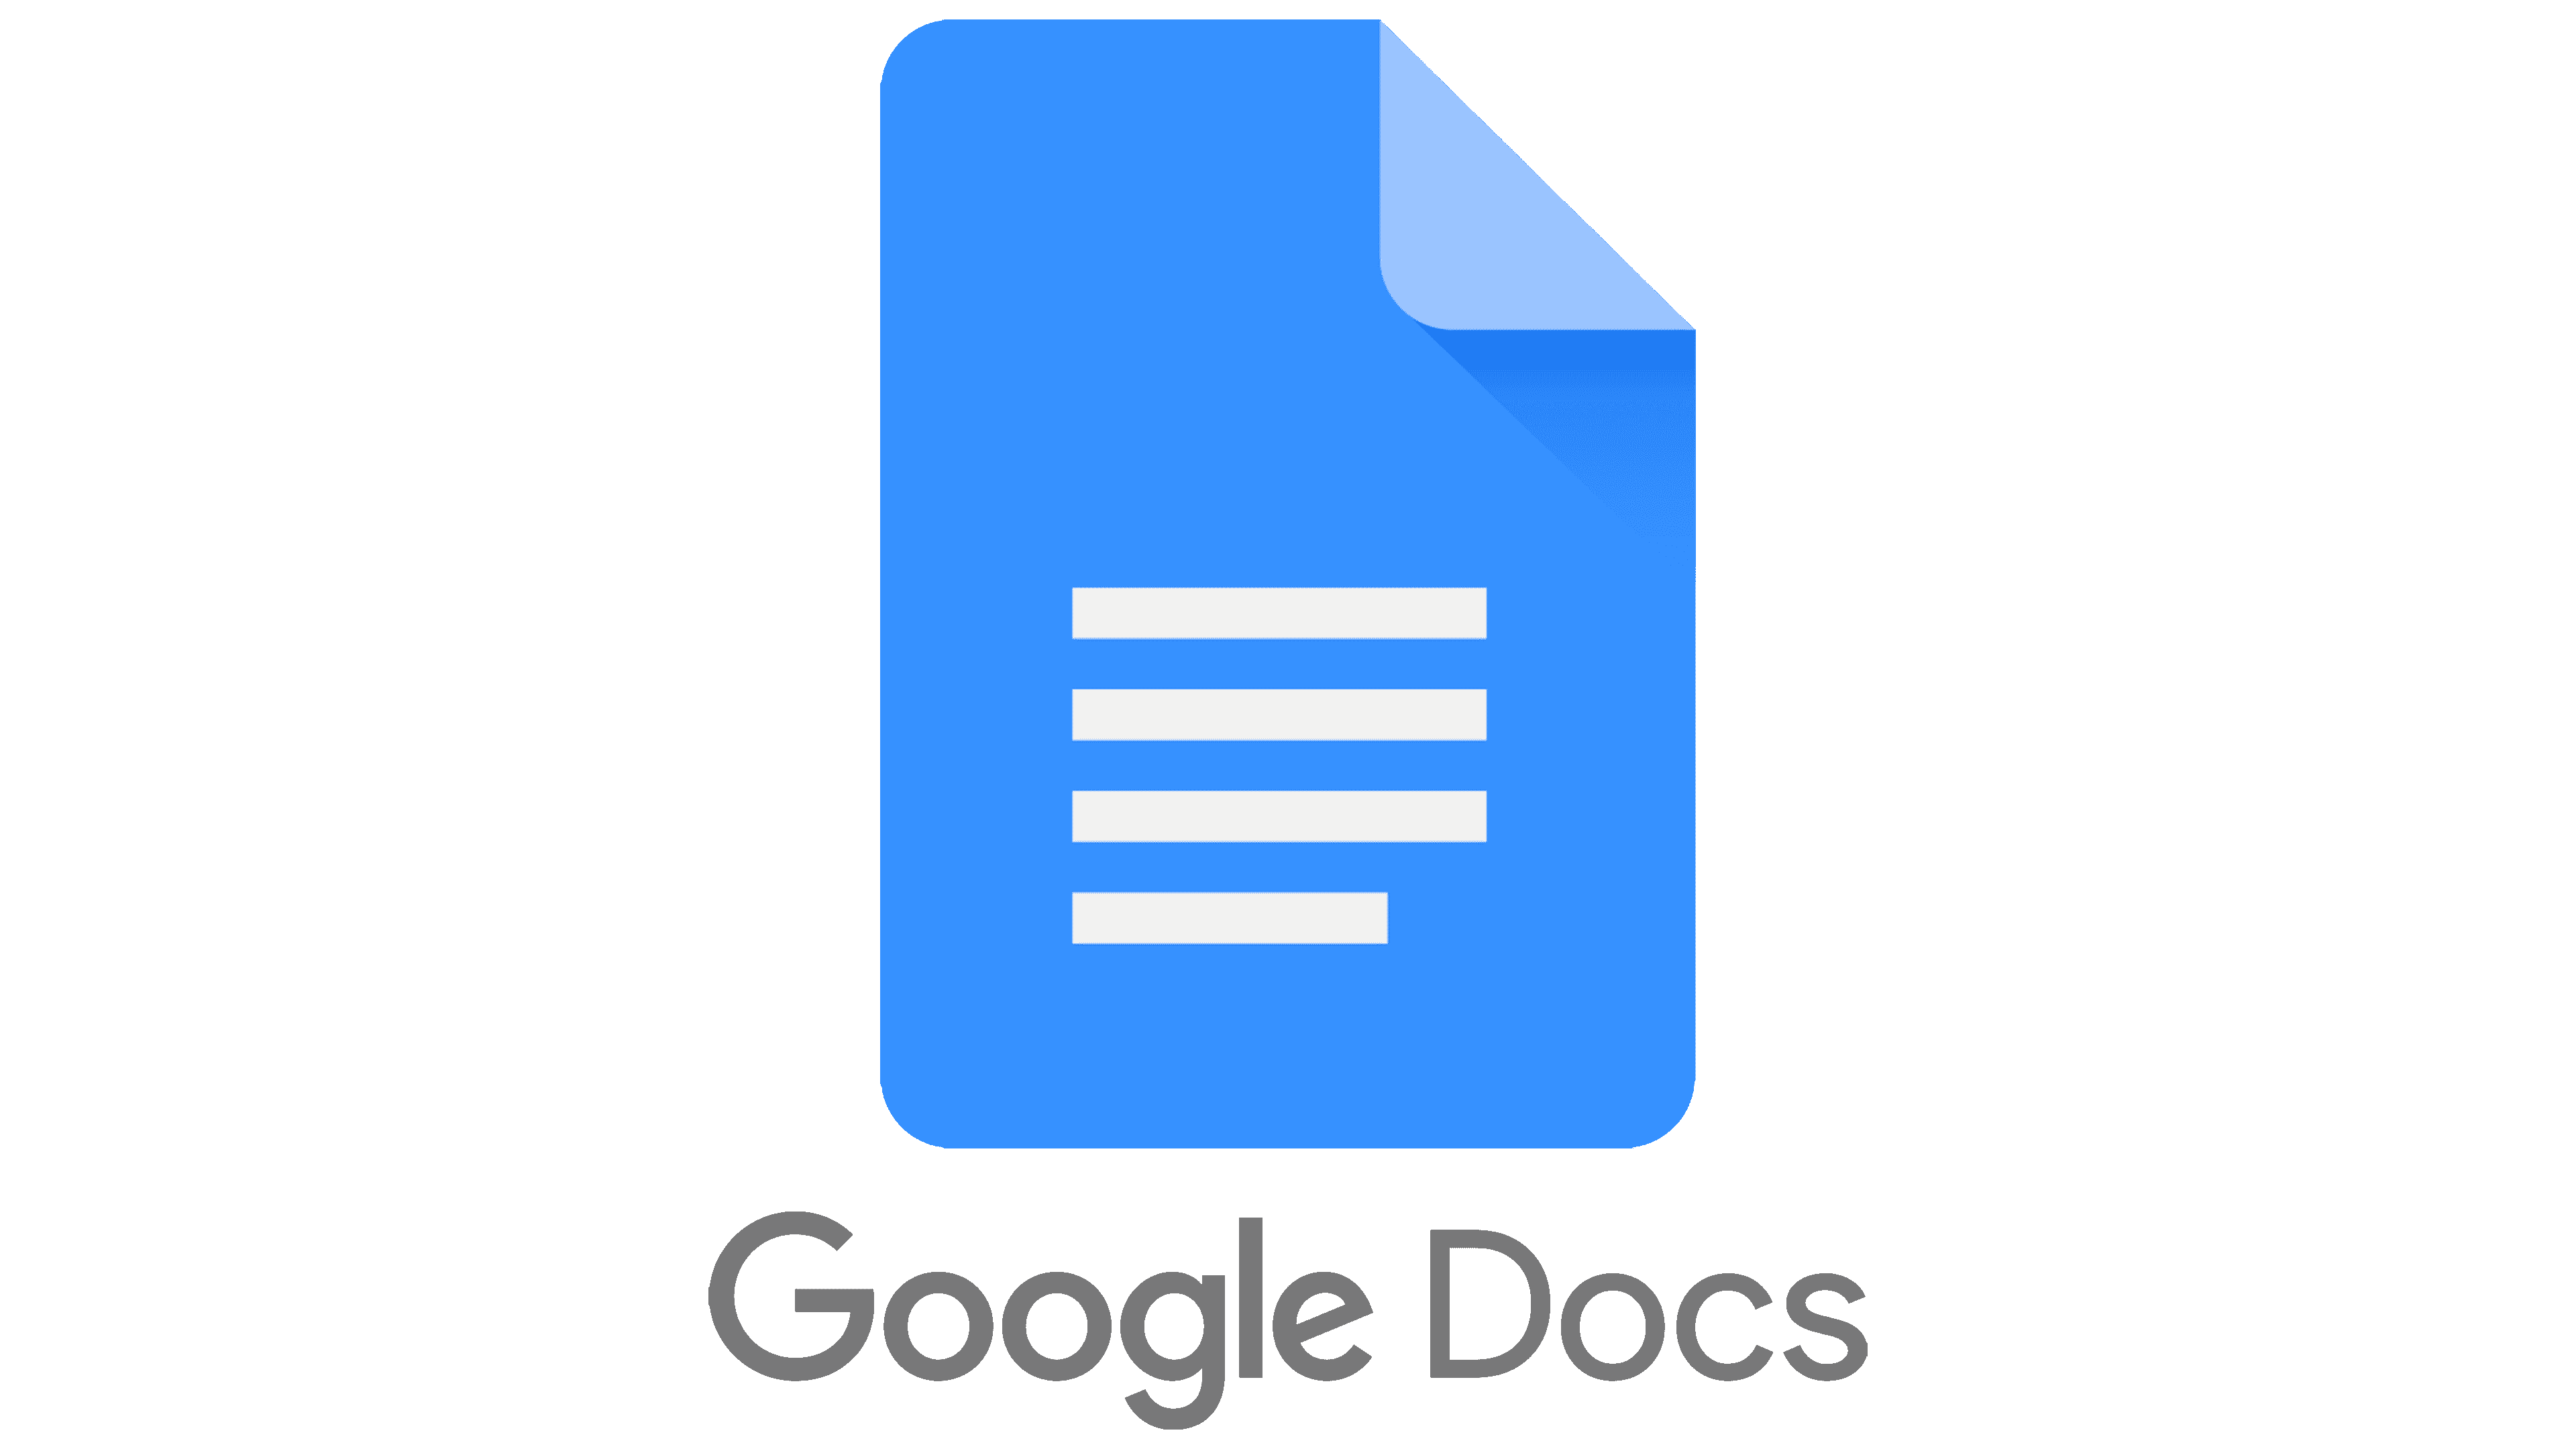 Google Docs rolls out code blocks for easier format and display of cod